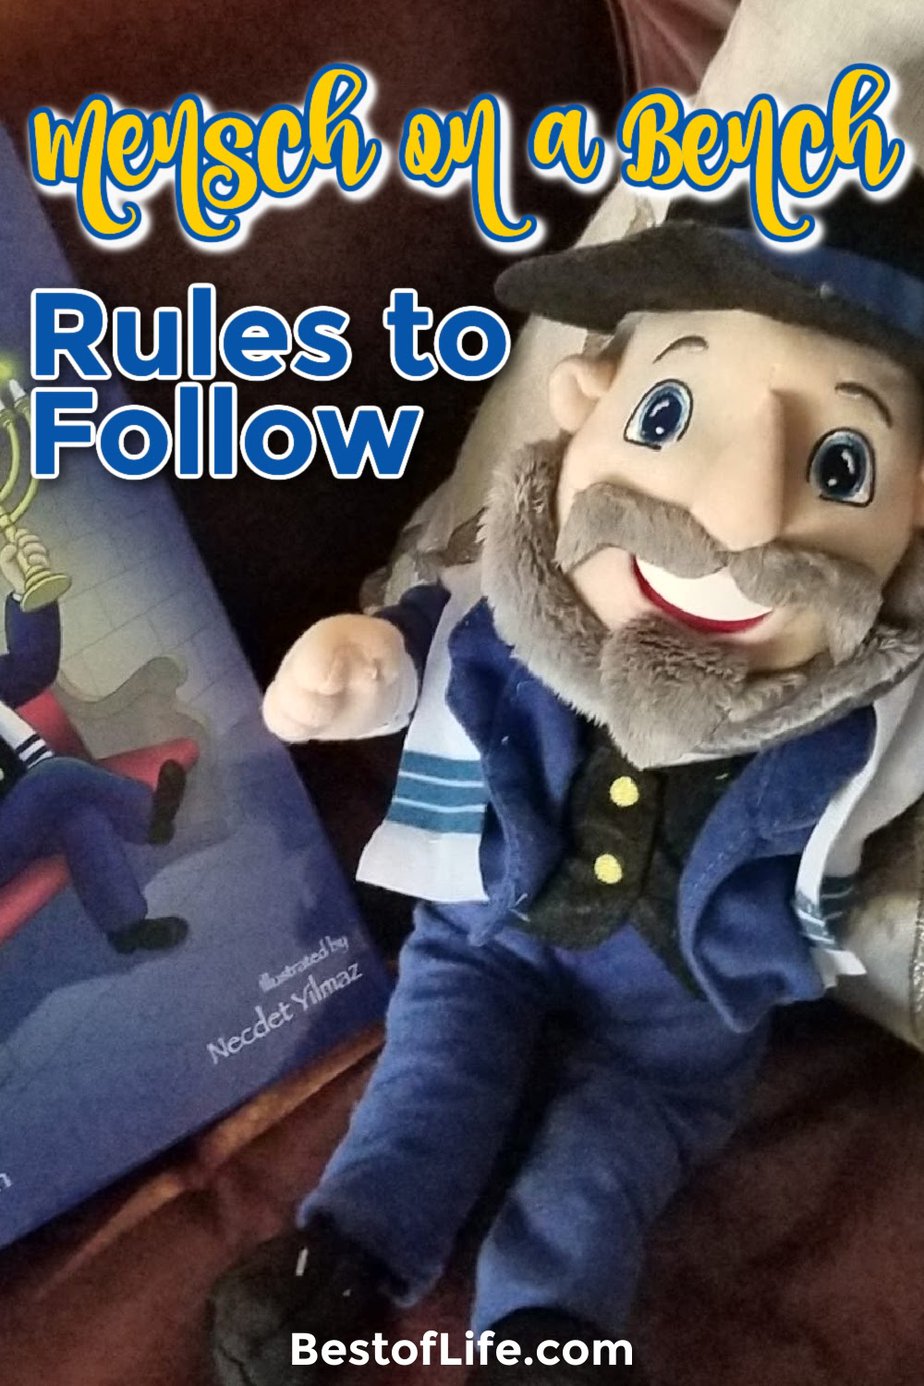 There are 8 rules to having a Mensch on a Bench and some even say there is an unwritten 9th rule that after Hanukkah Mensches like to cut loose after working so hard! Jewish Traditions | Hanukkah Traditions | Elf on a Shelf vs Mensch on a Bench | When is Hanukkah